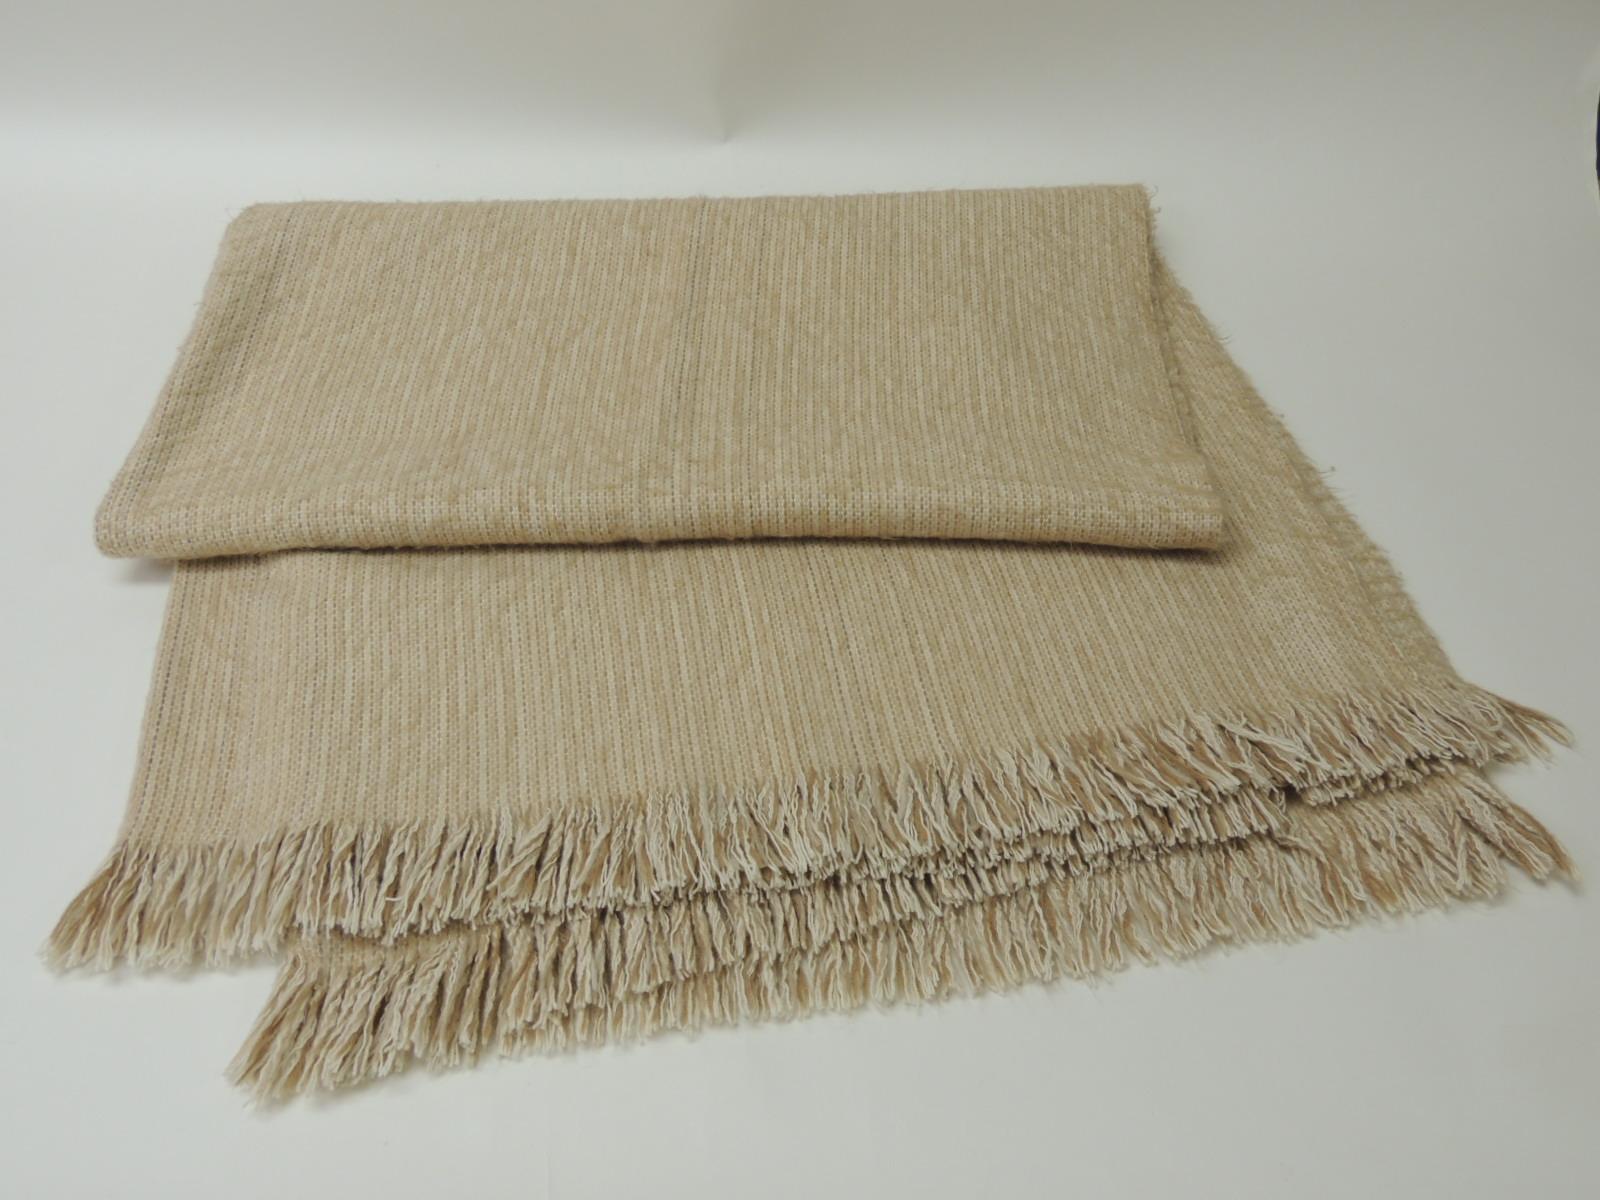 Hollywood Regency Vintage Large Ecru Tone-on-tone Woven Throw with Small Fringes